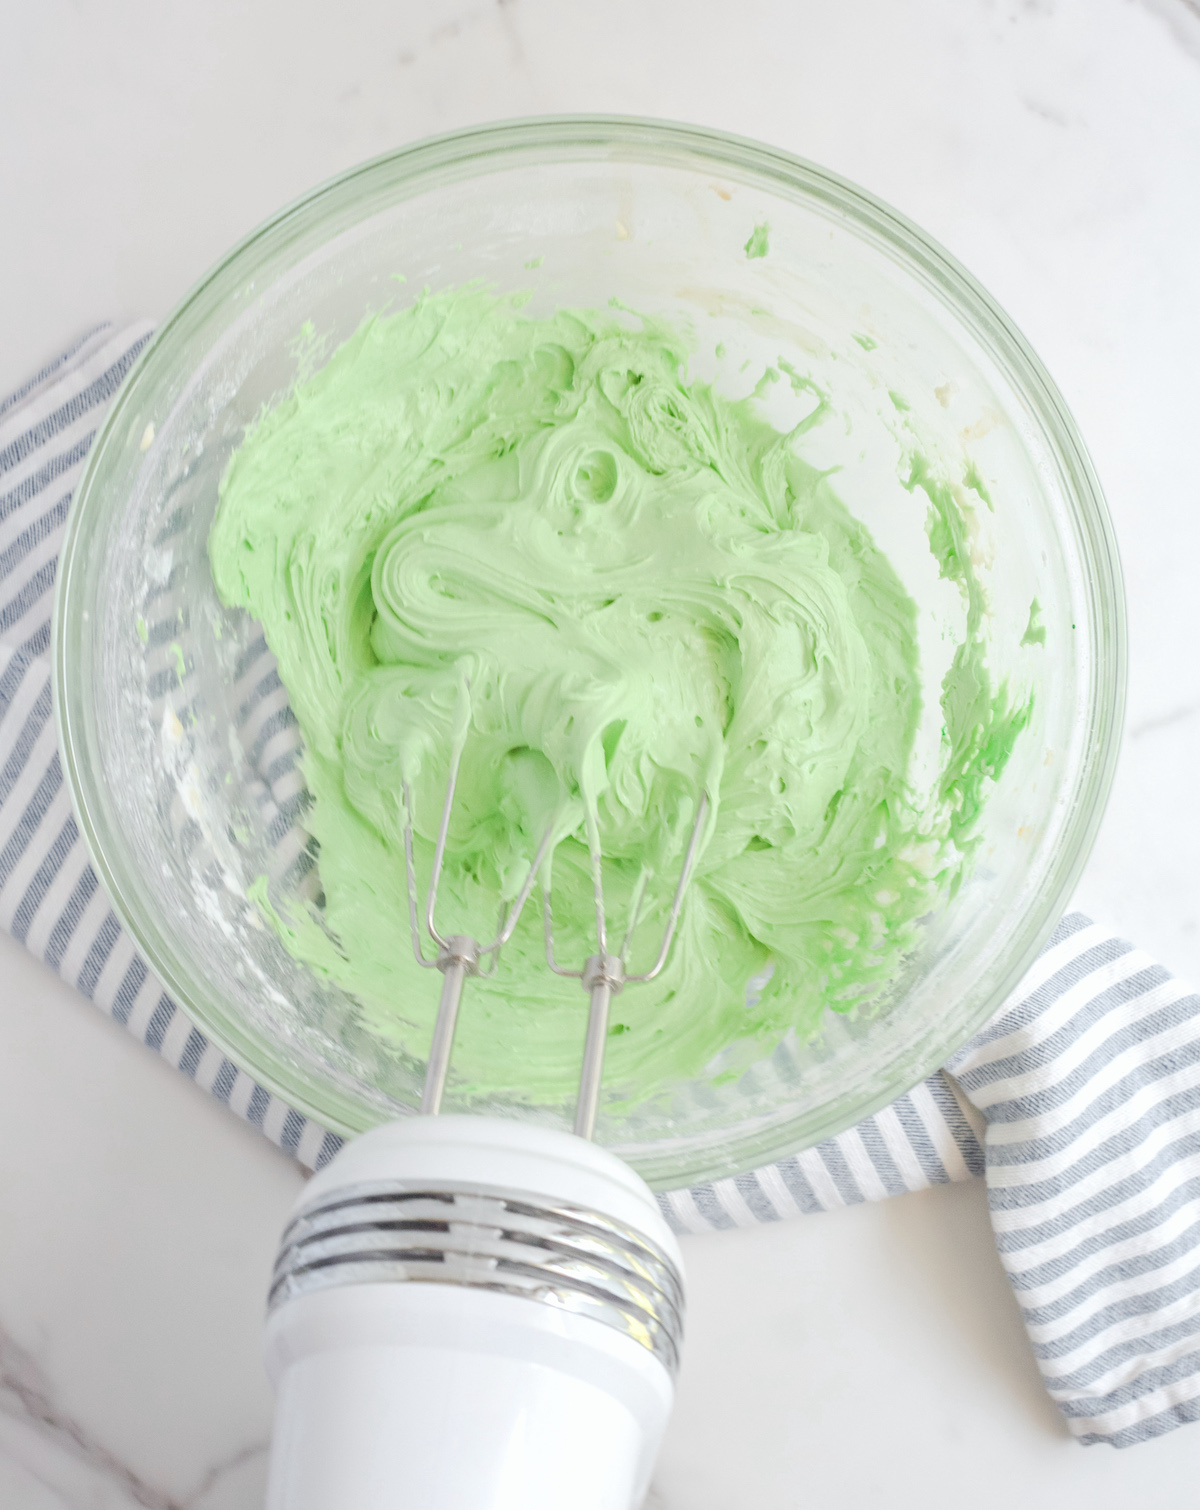 Batter dyed green and mixed with a mixer